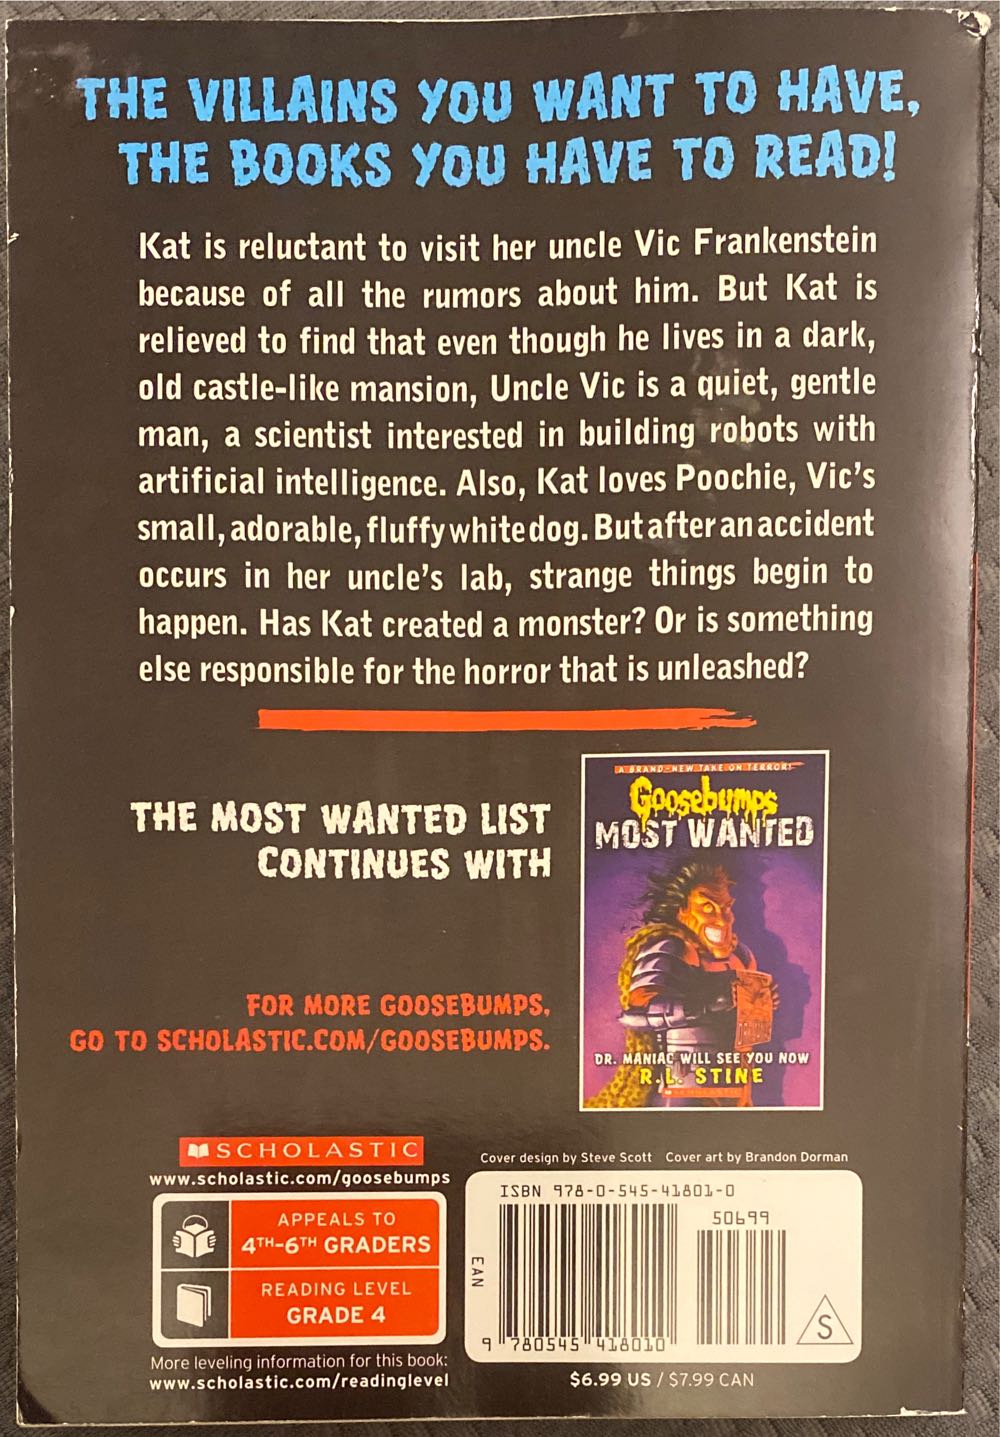 Frankenstein’s Dog - R. L. Stine (Scholastic Inc. - Paperback) book collectible [Barcode 9780545418010] - Main Image 2